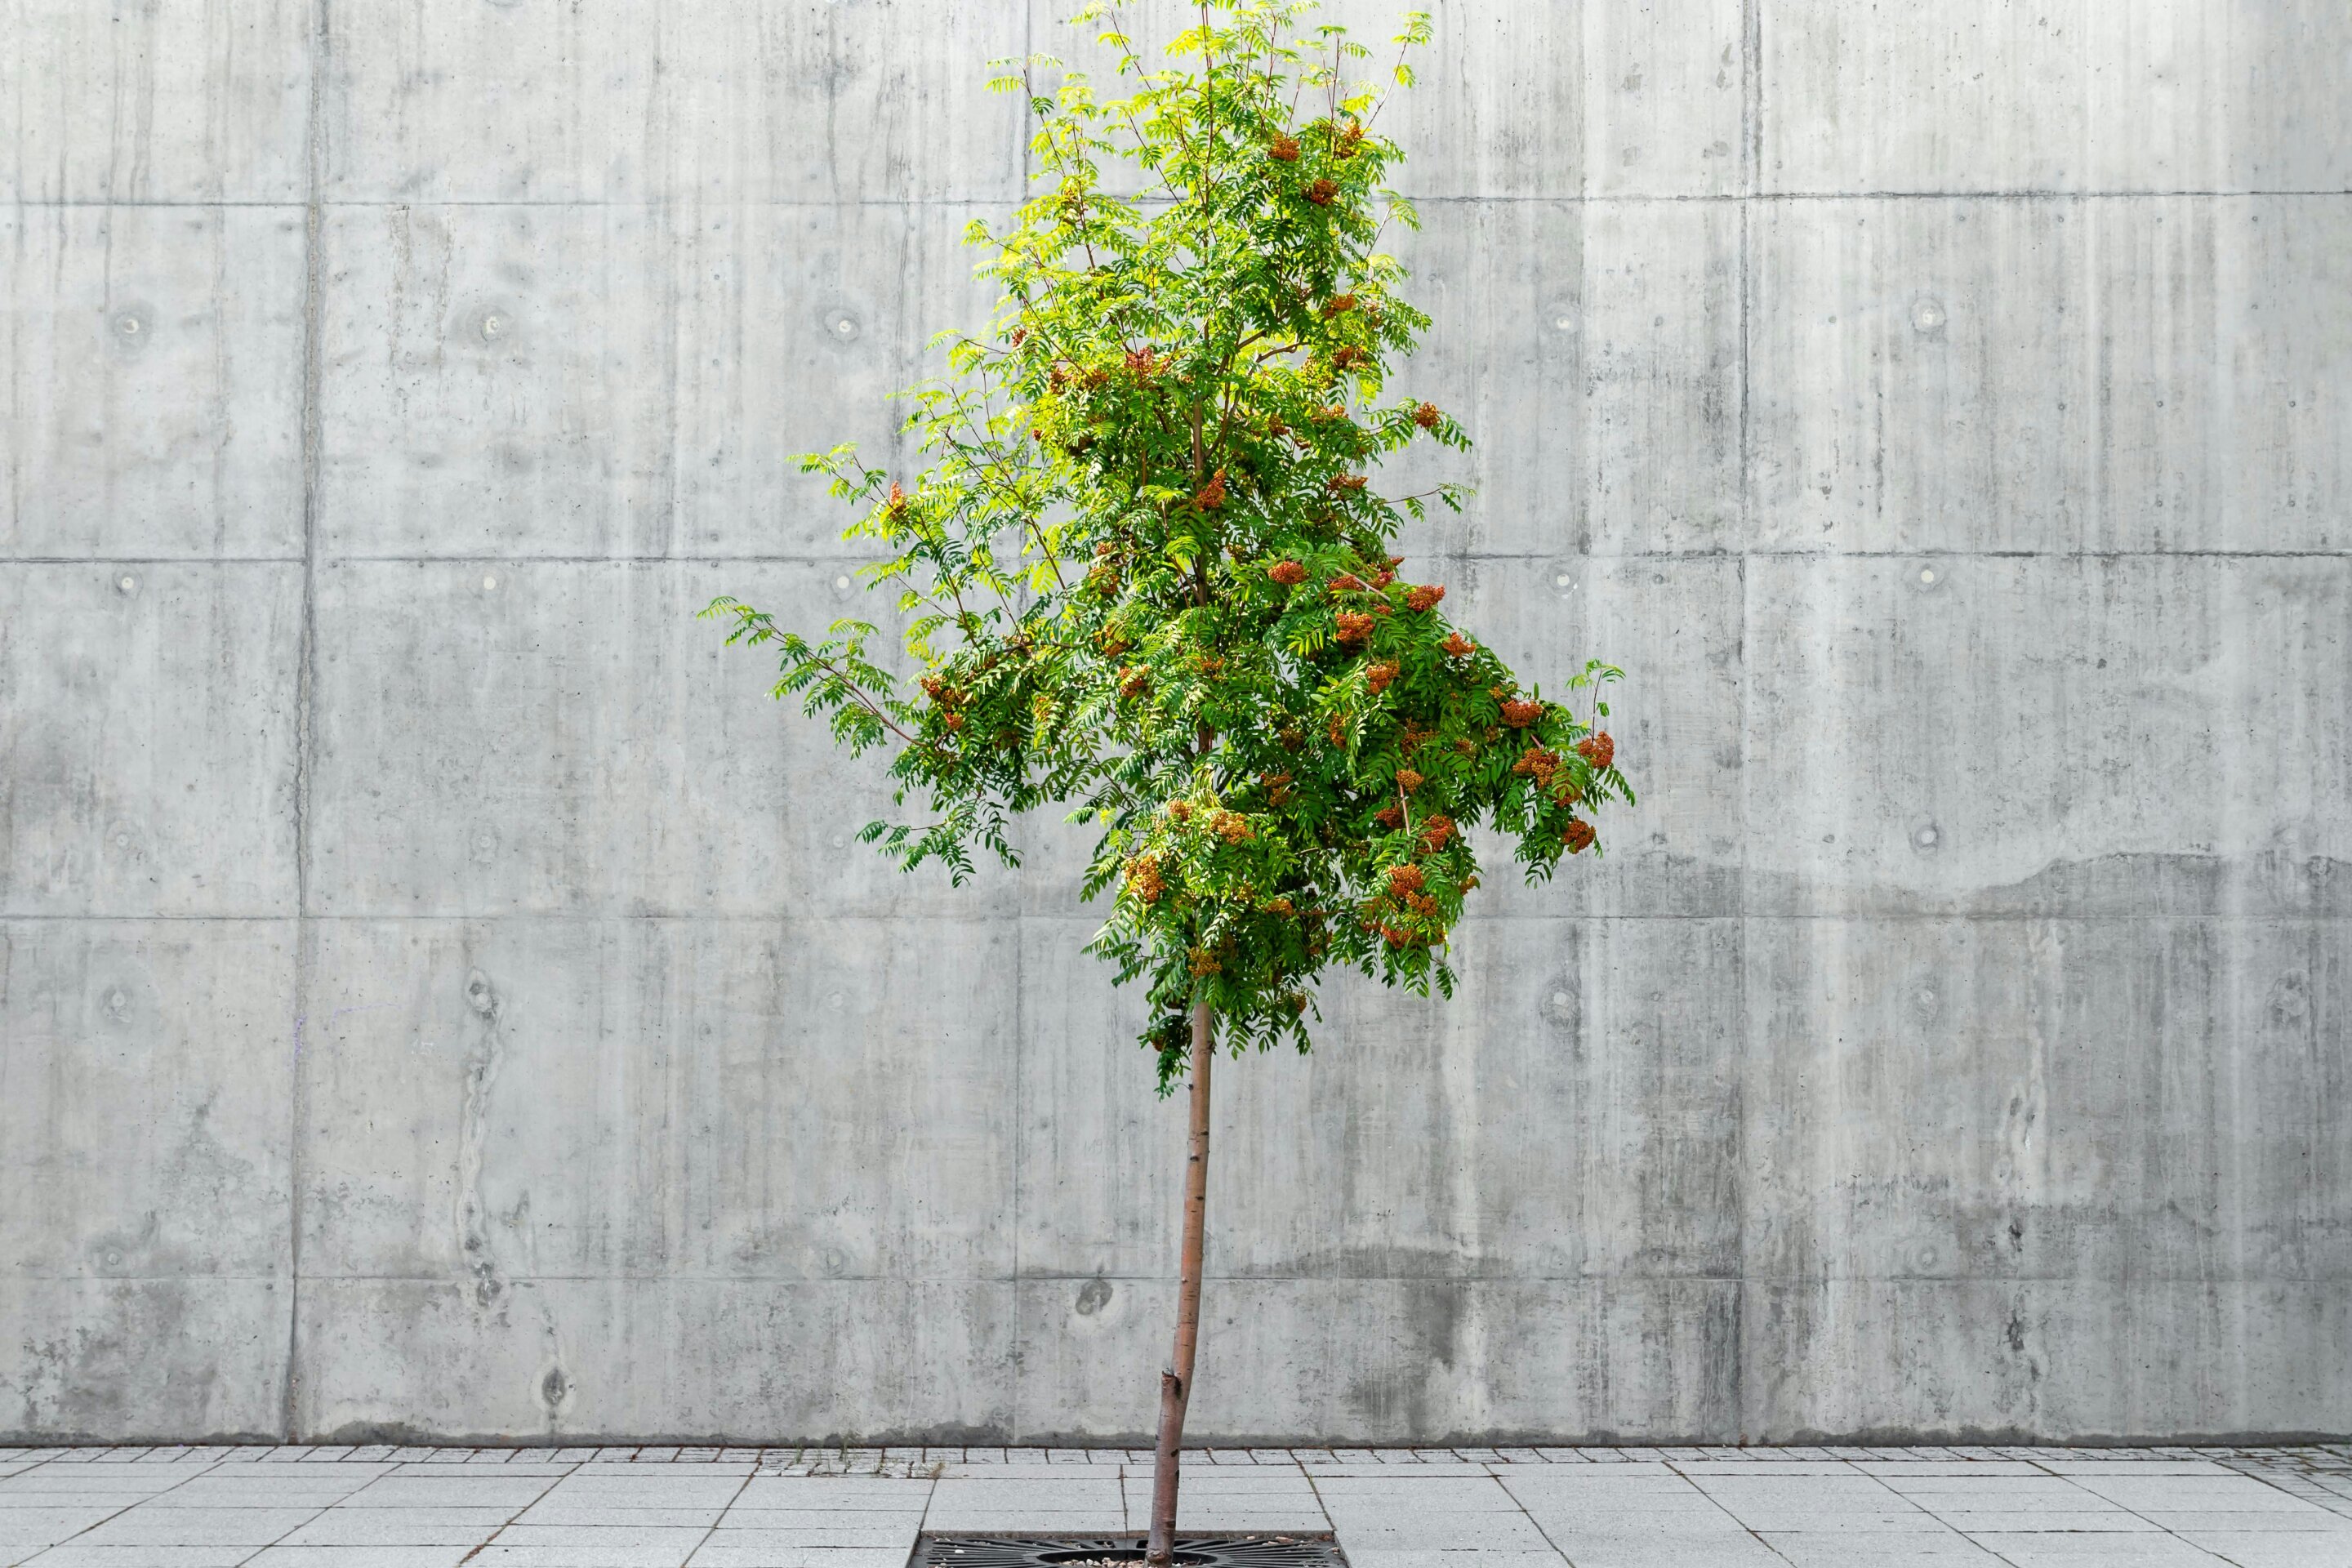 Study details strategies for successful urban tree planting initiatives